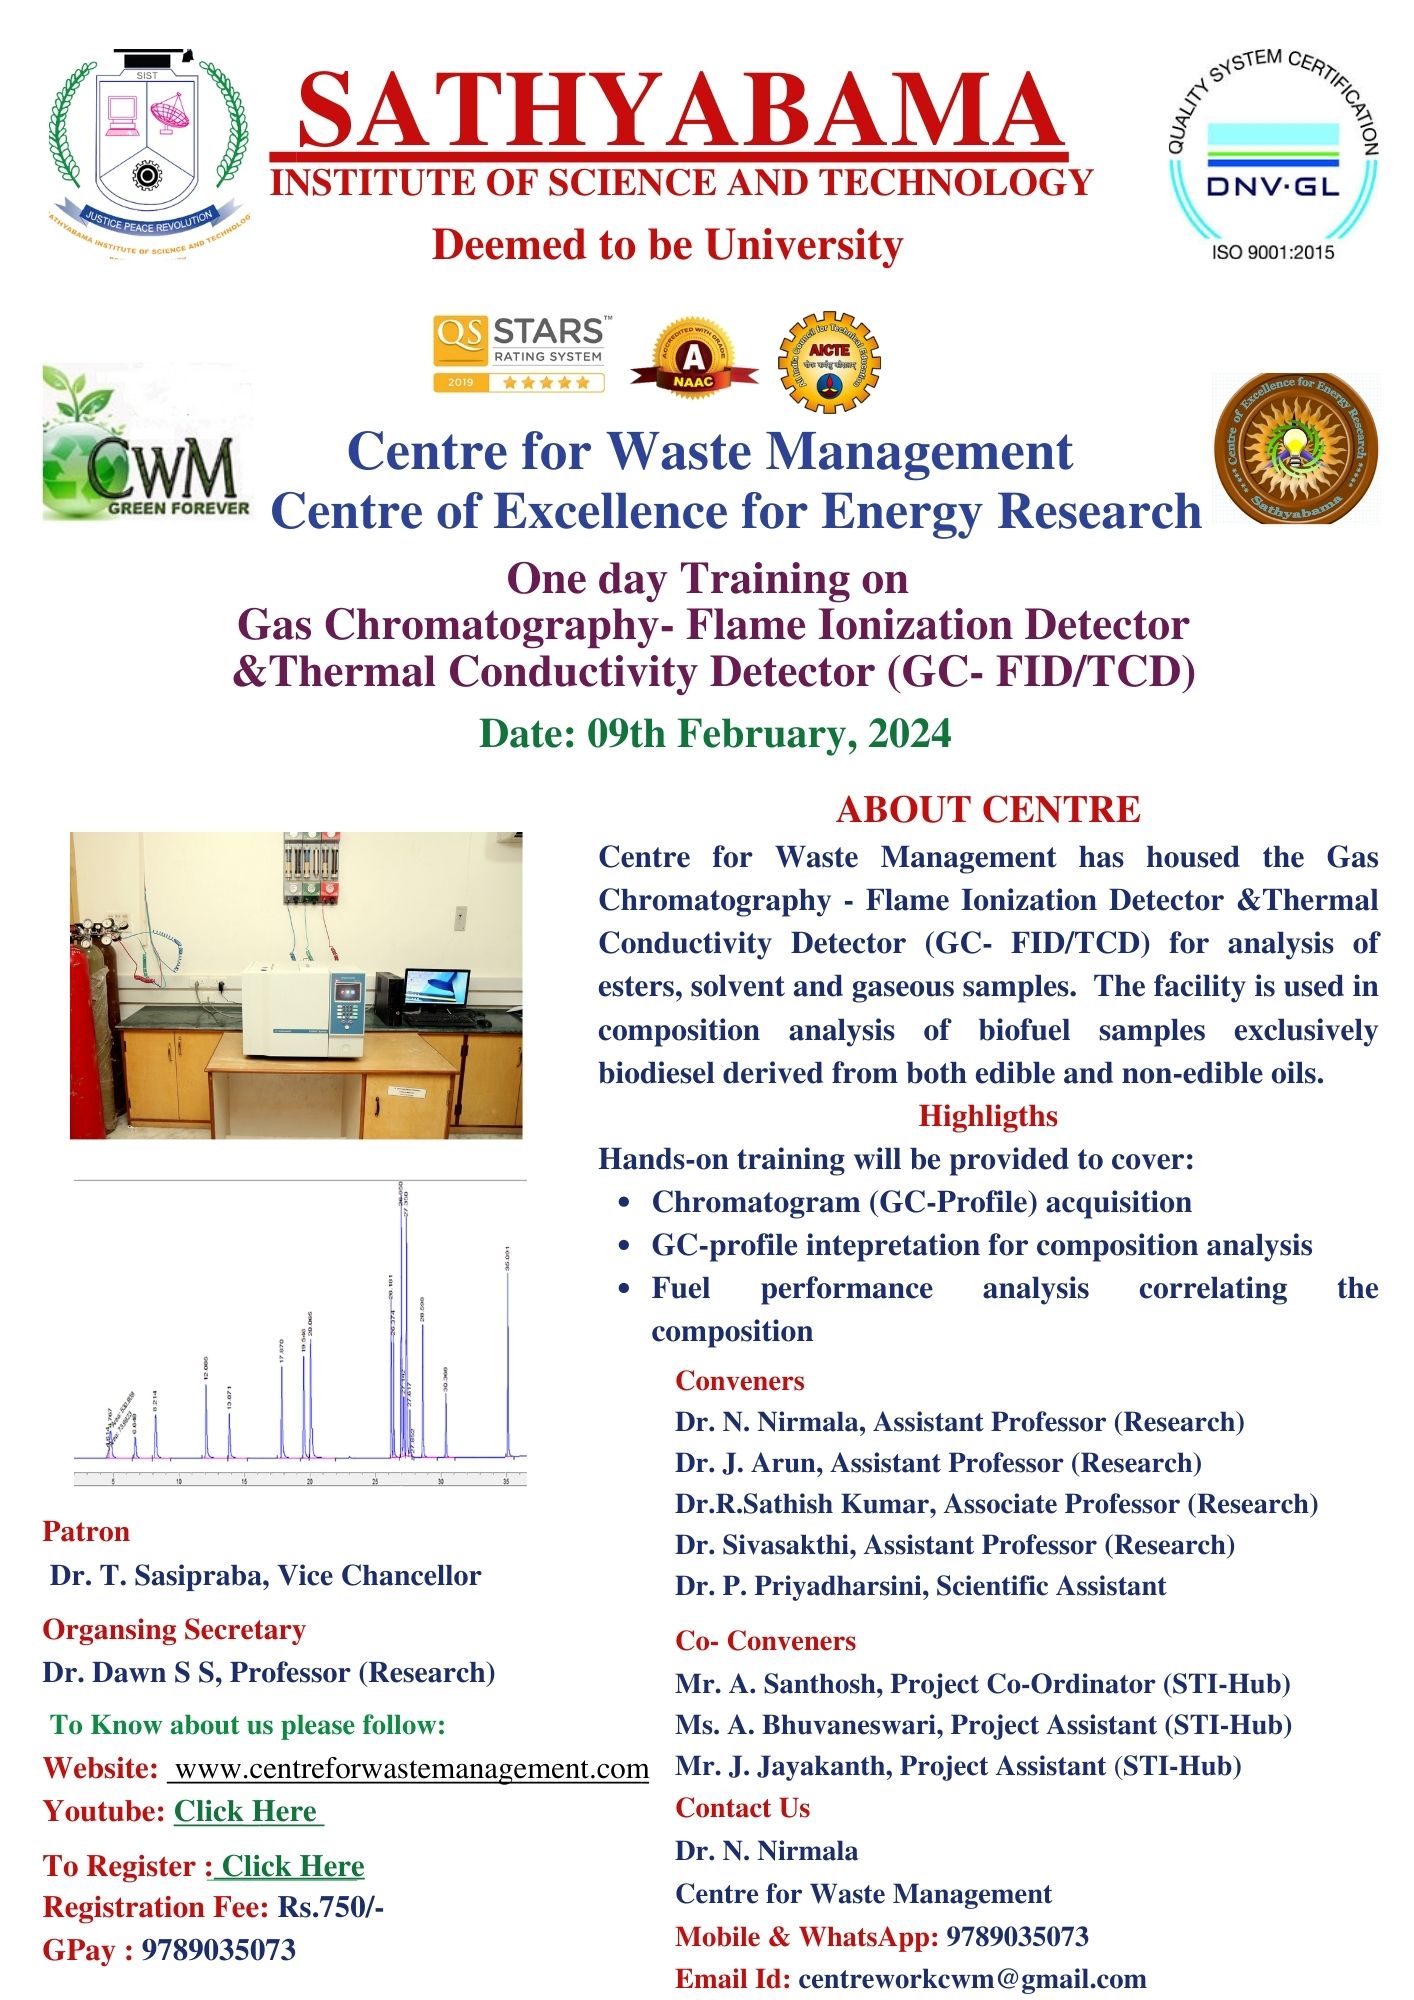 One day Training on Gas Chromatography- Flame Ionization Detector &Thermal Conductivity Detector (GC- FID/TCD) 2024